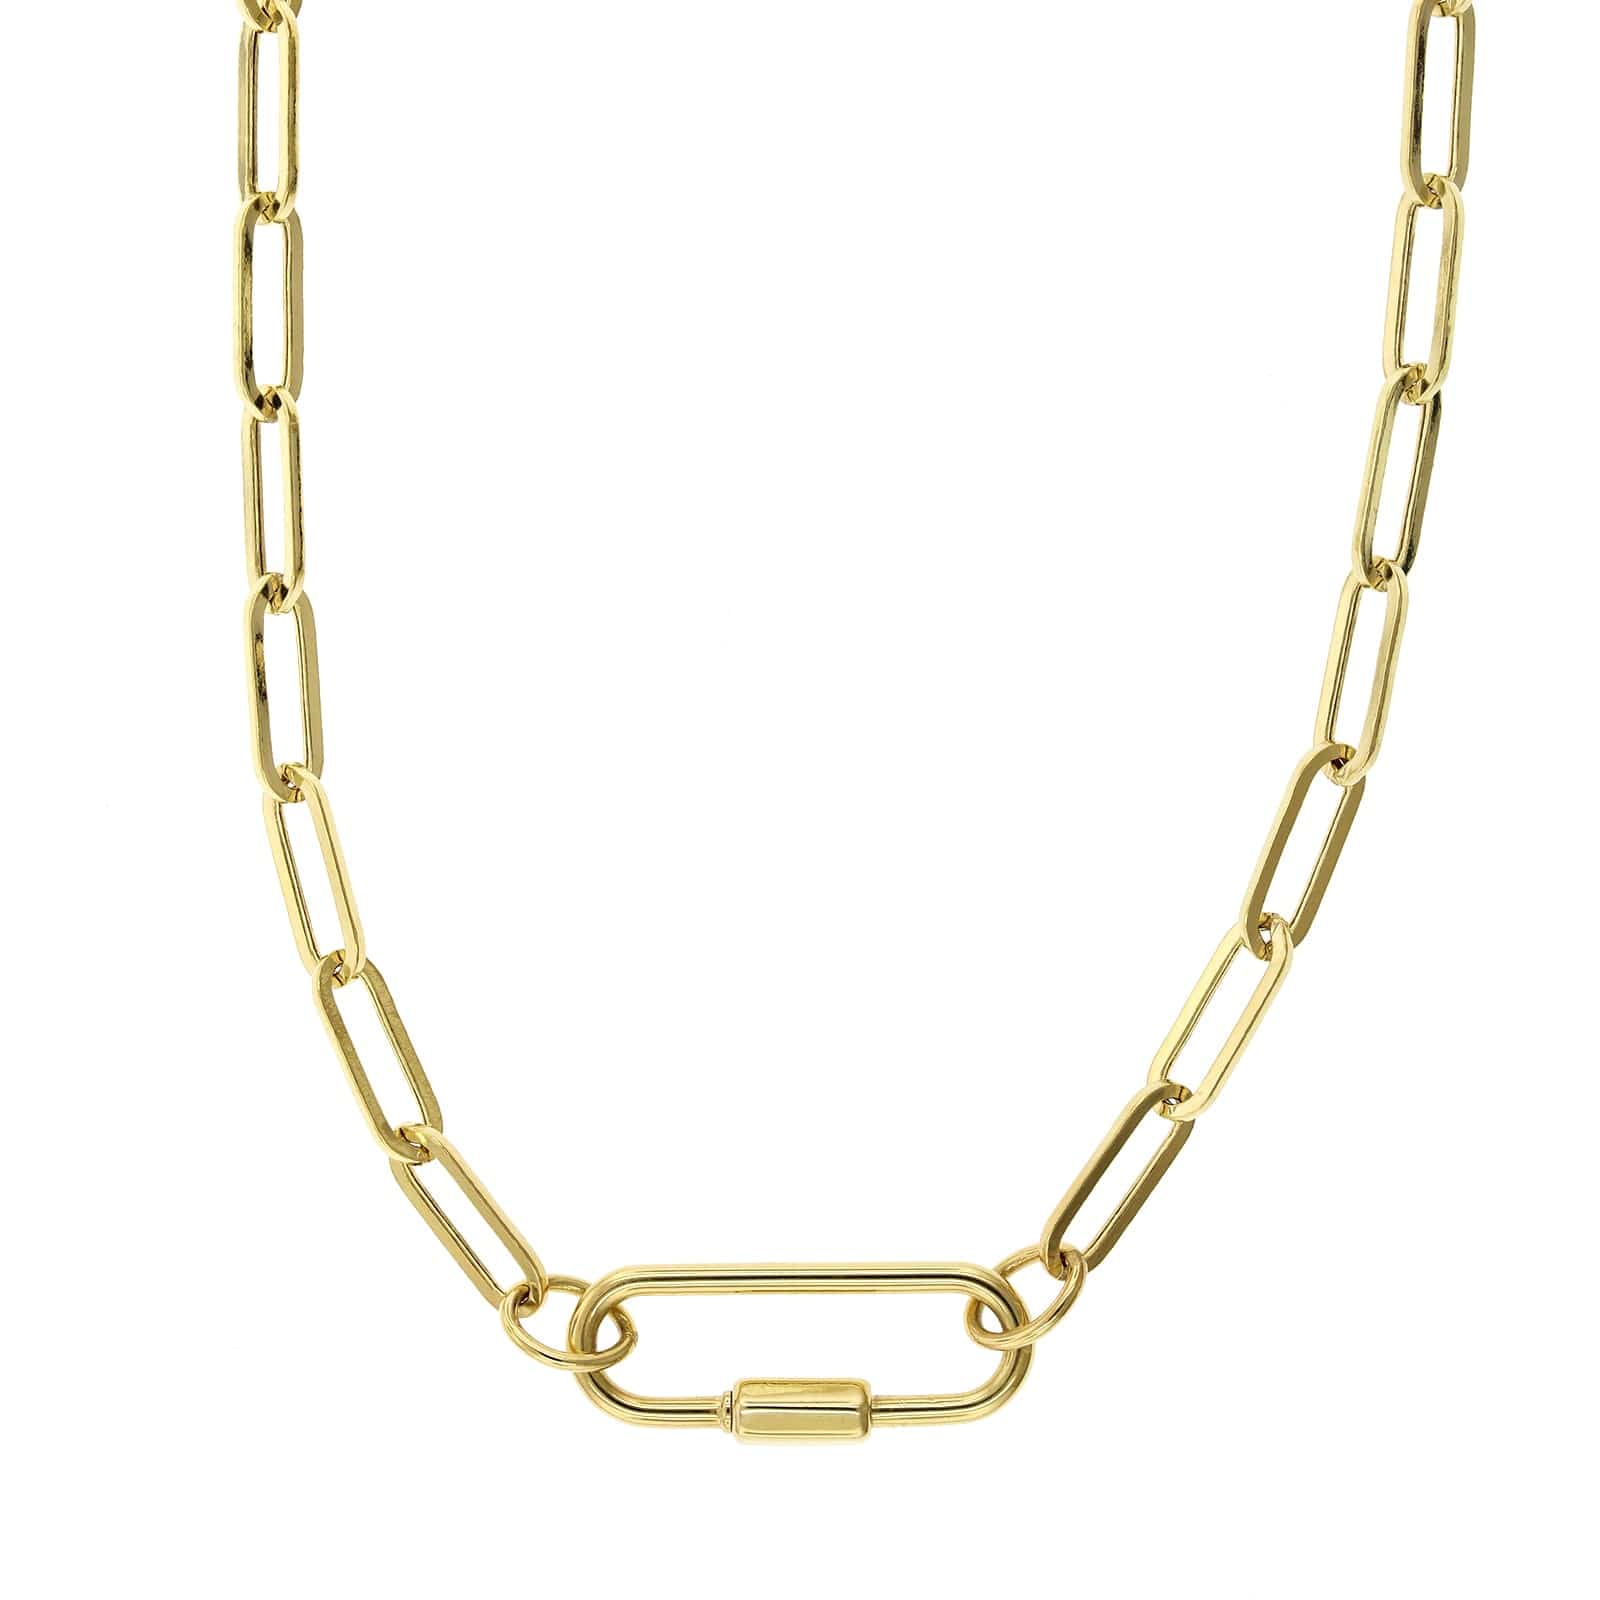 14kt Yellow Gold Carabiner Paper Clip Link Necklace. 18